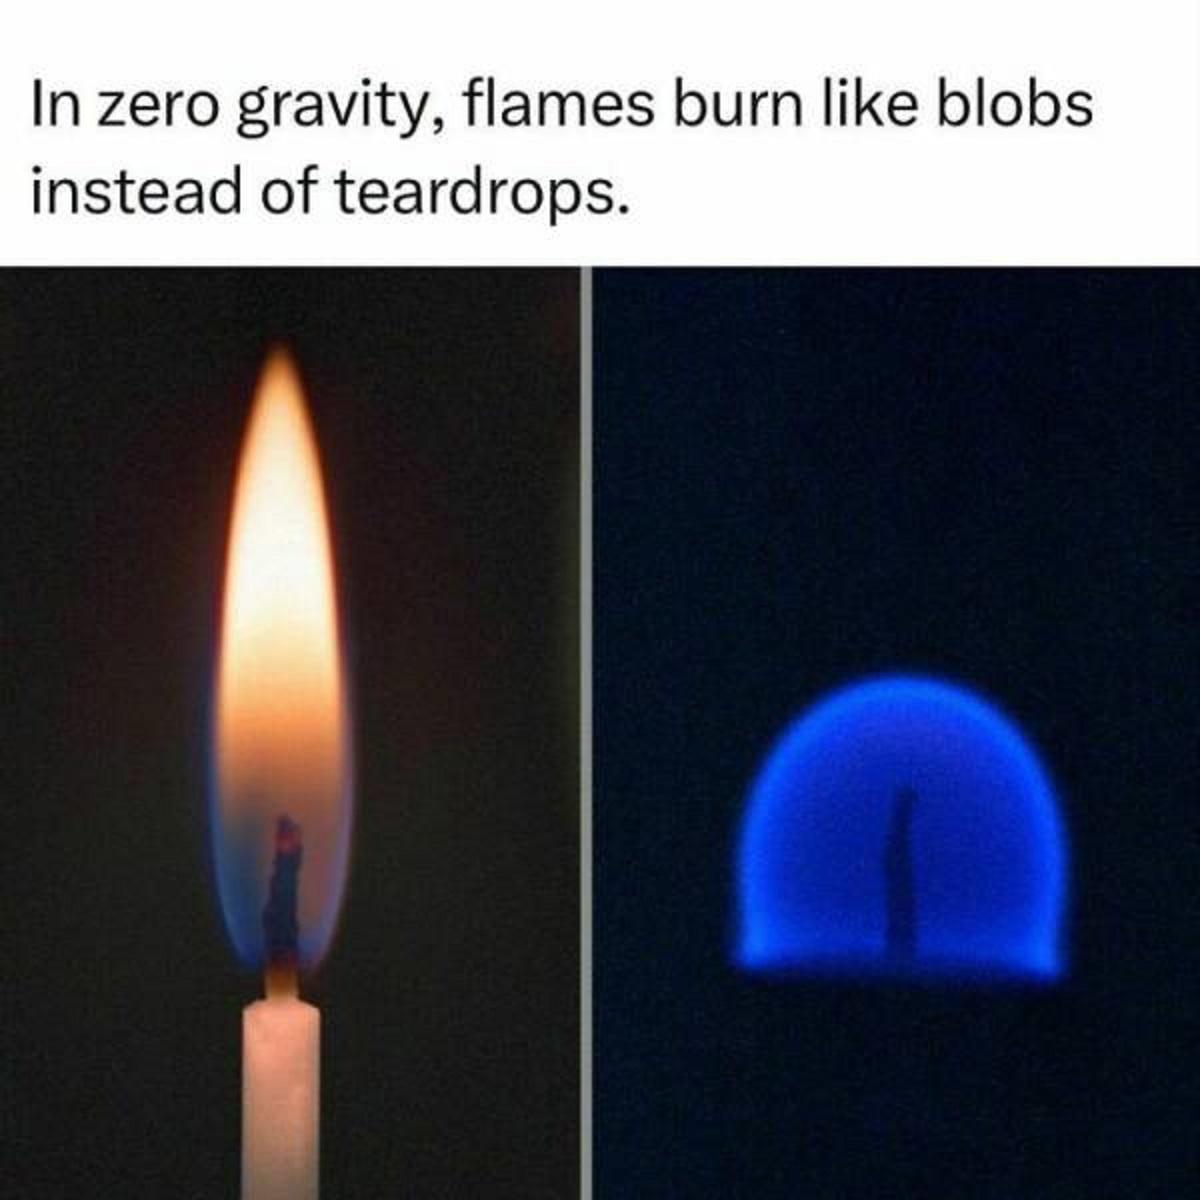 round blue candle flame - In zero gravity, flames burn blobs instead of teardrops.